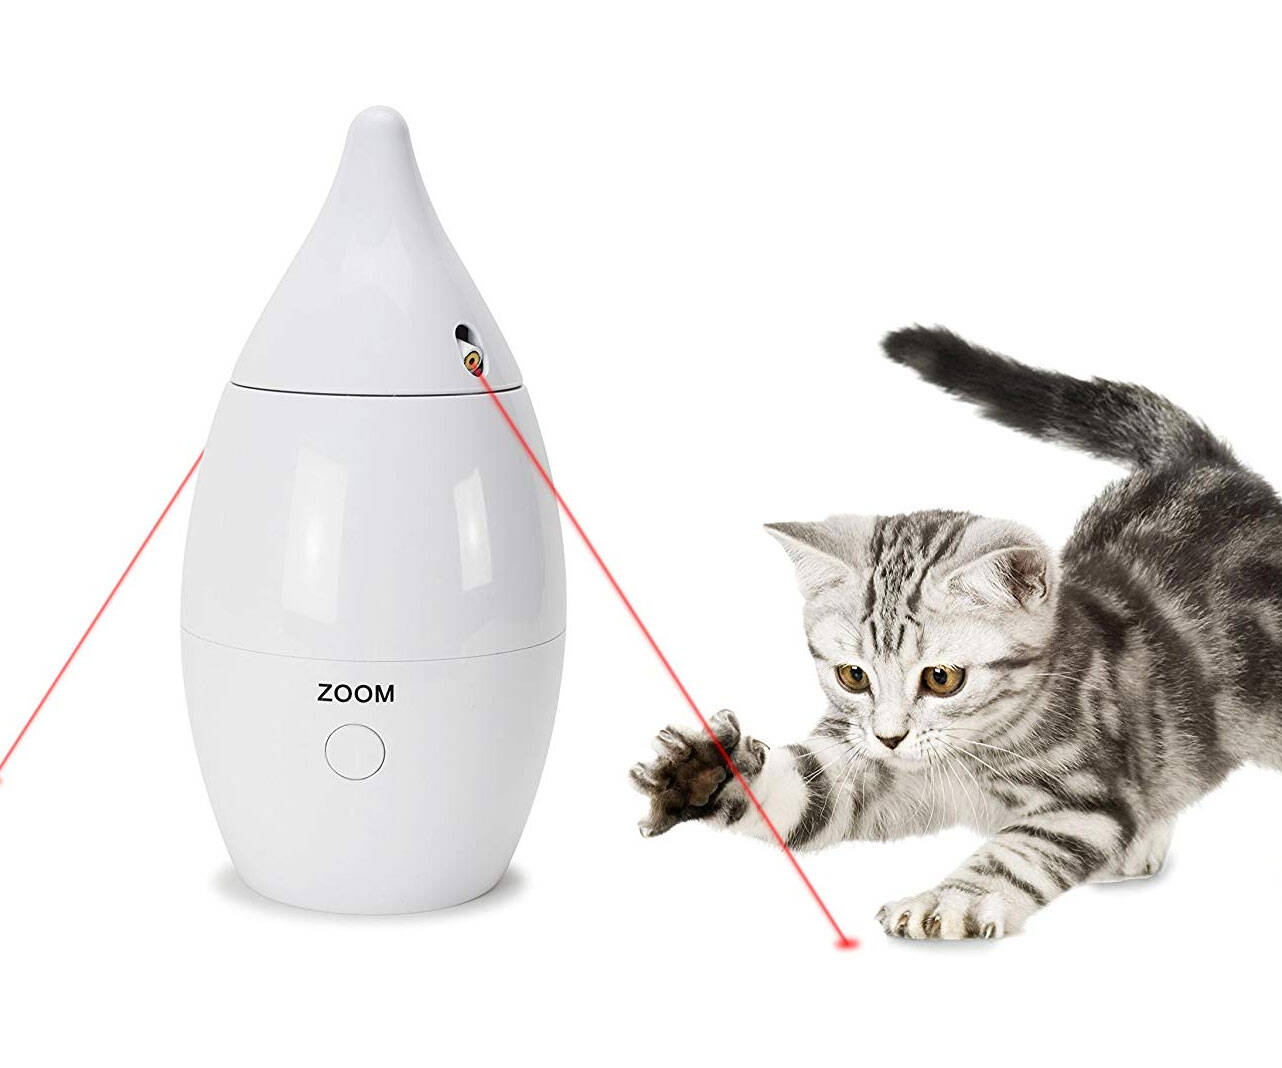 Rotating Laser Cat Toy - coolthings.us